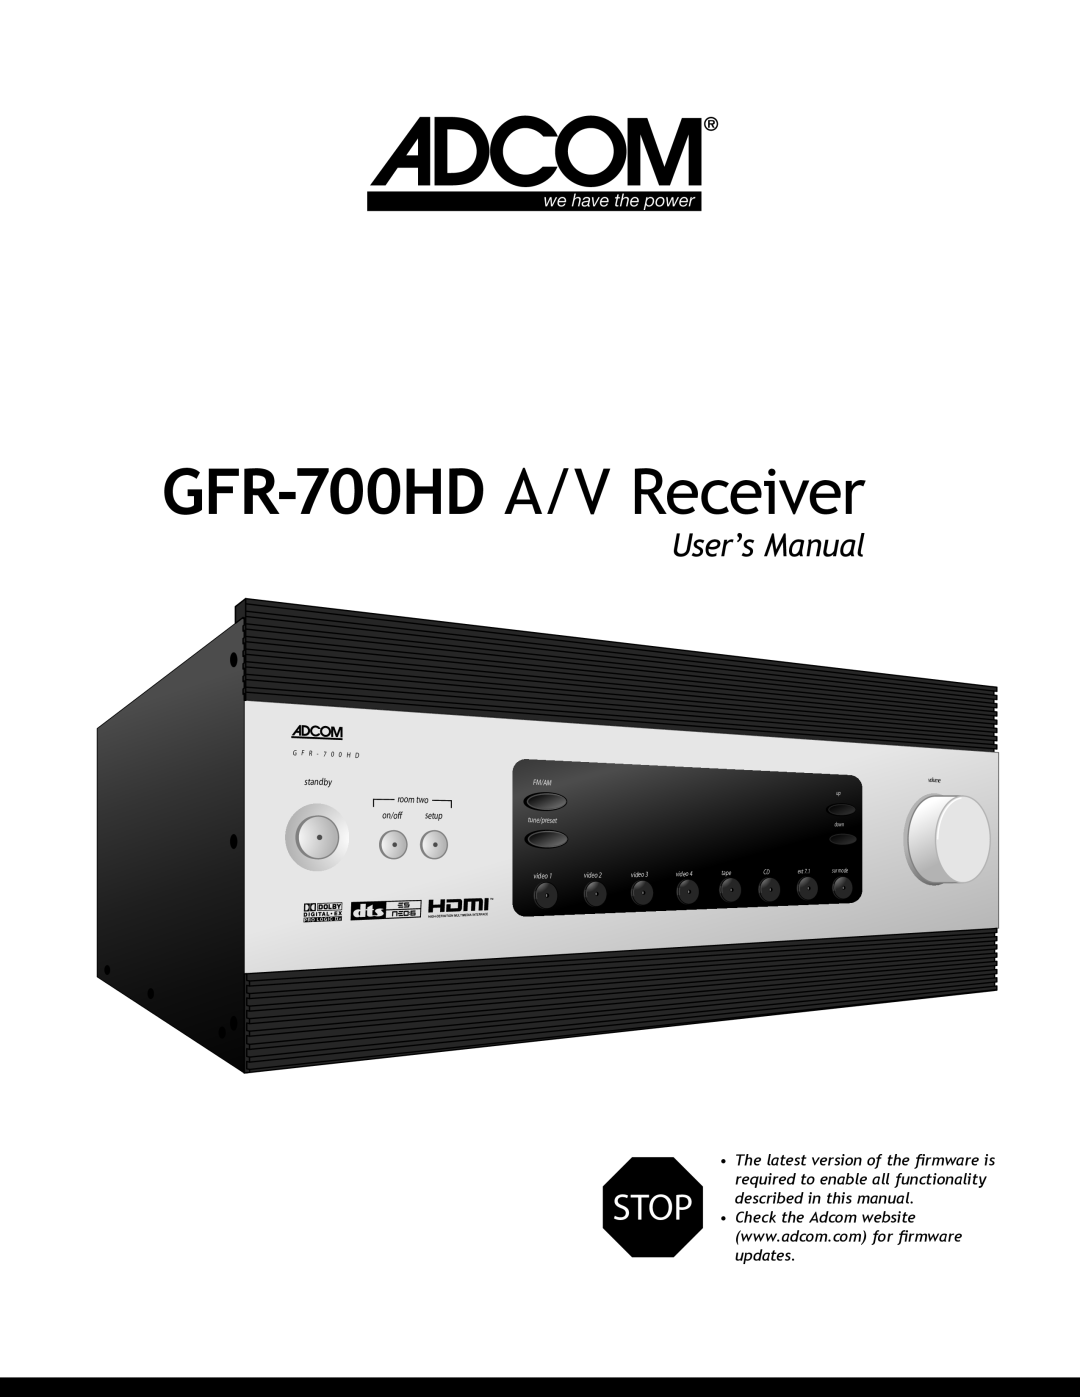 Adcom user manual GFR-700HD A/V Receiver, Stop, The latest version of the ﬁrmware is 